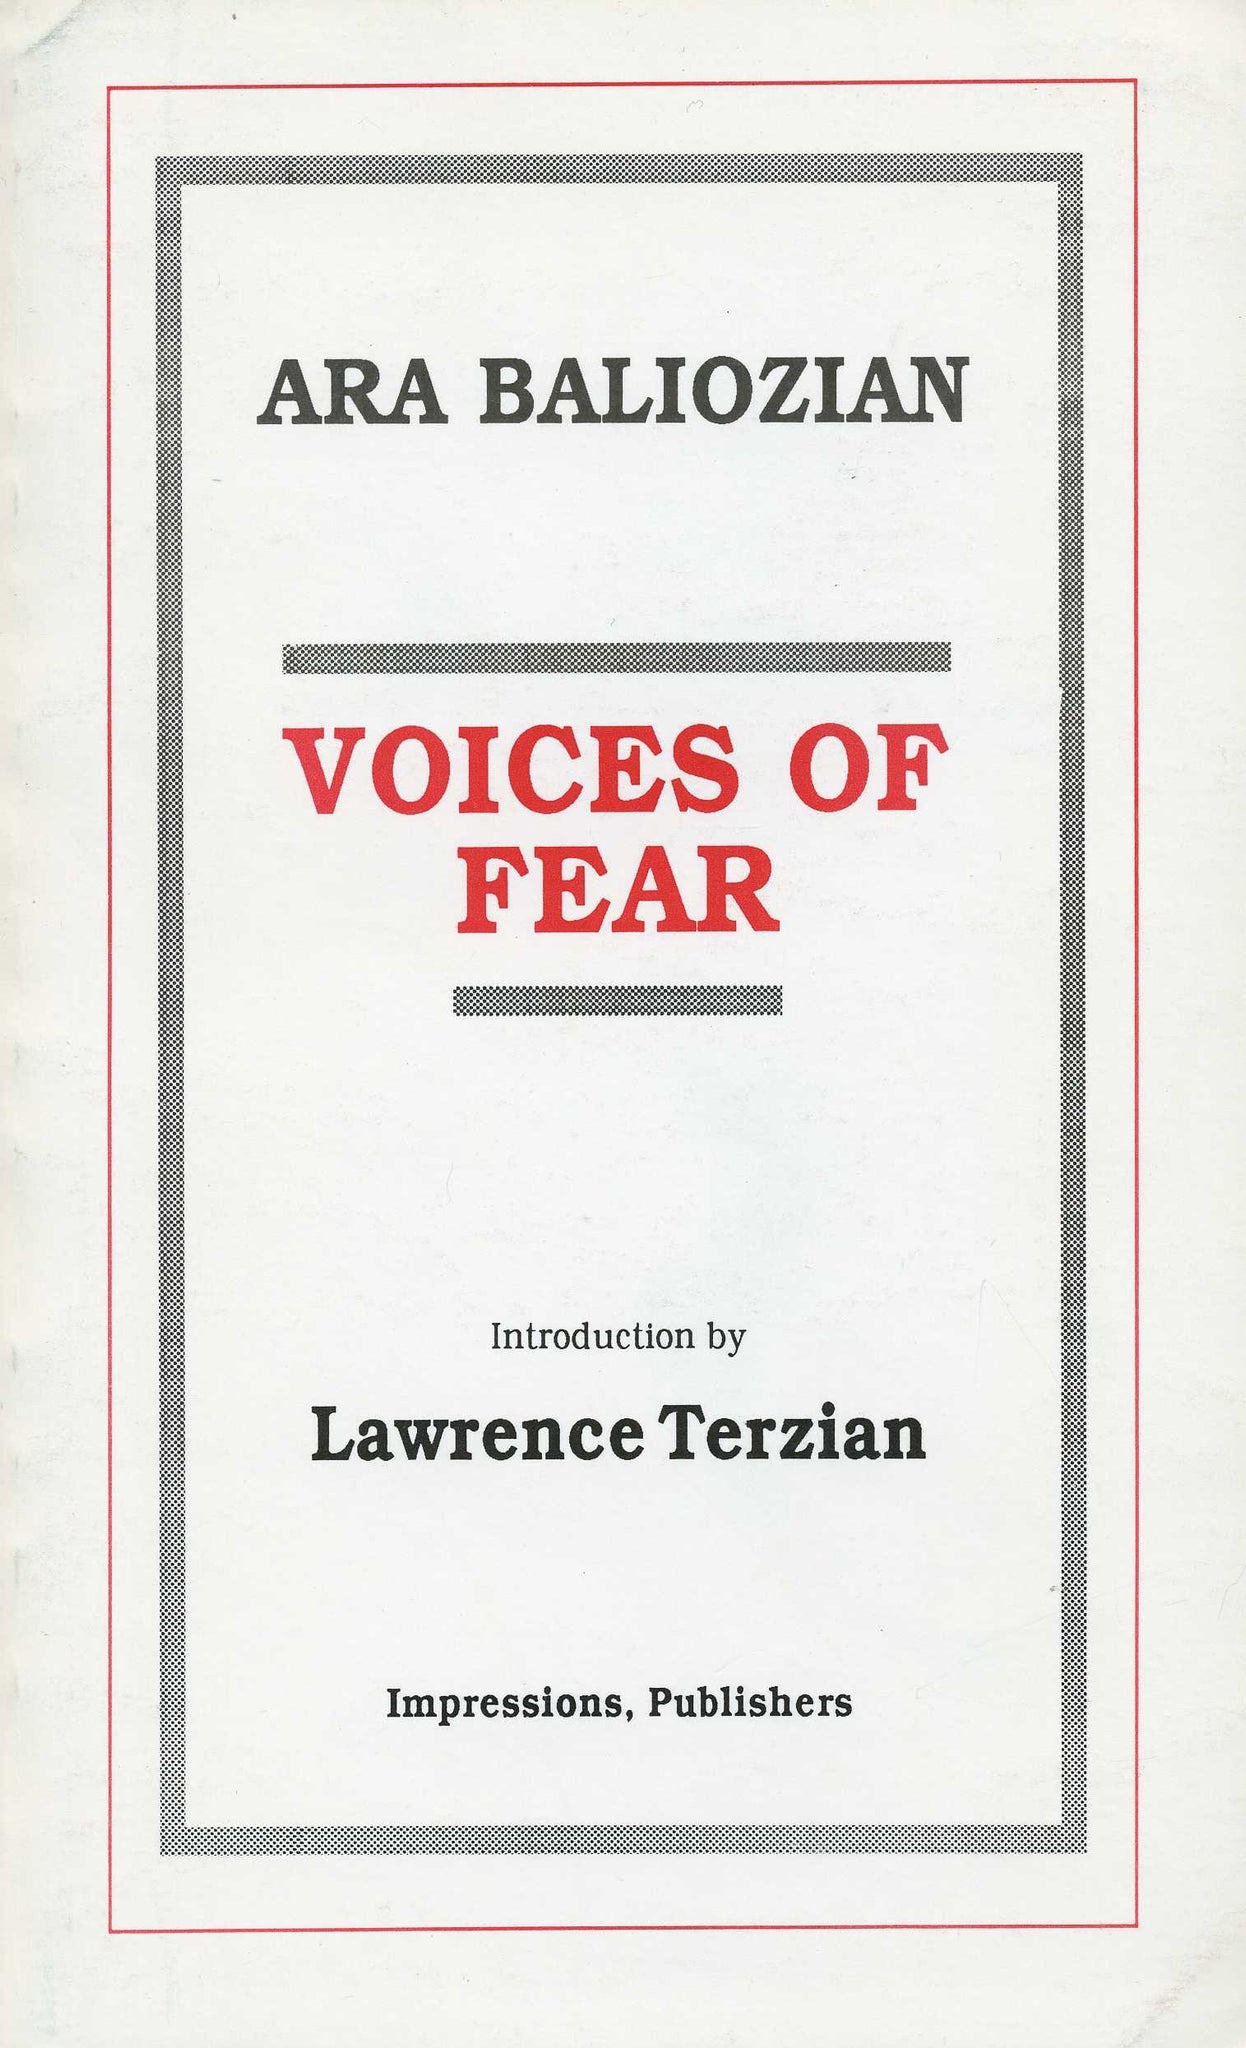 VOICES OF FEAR